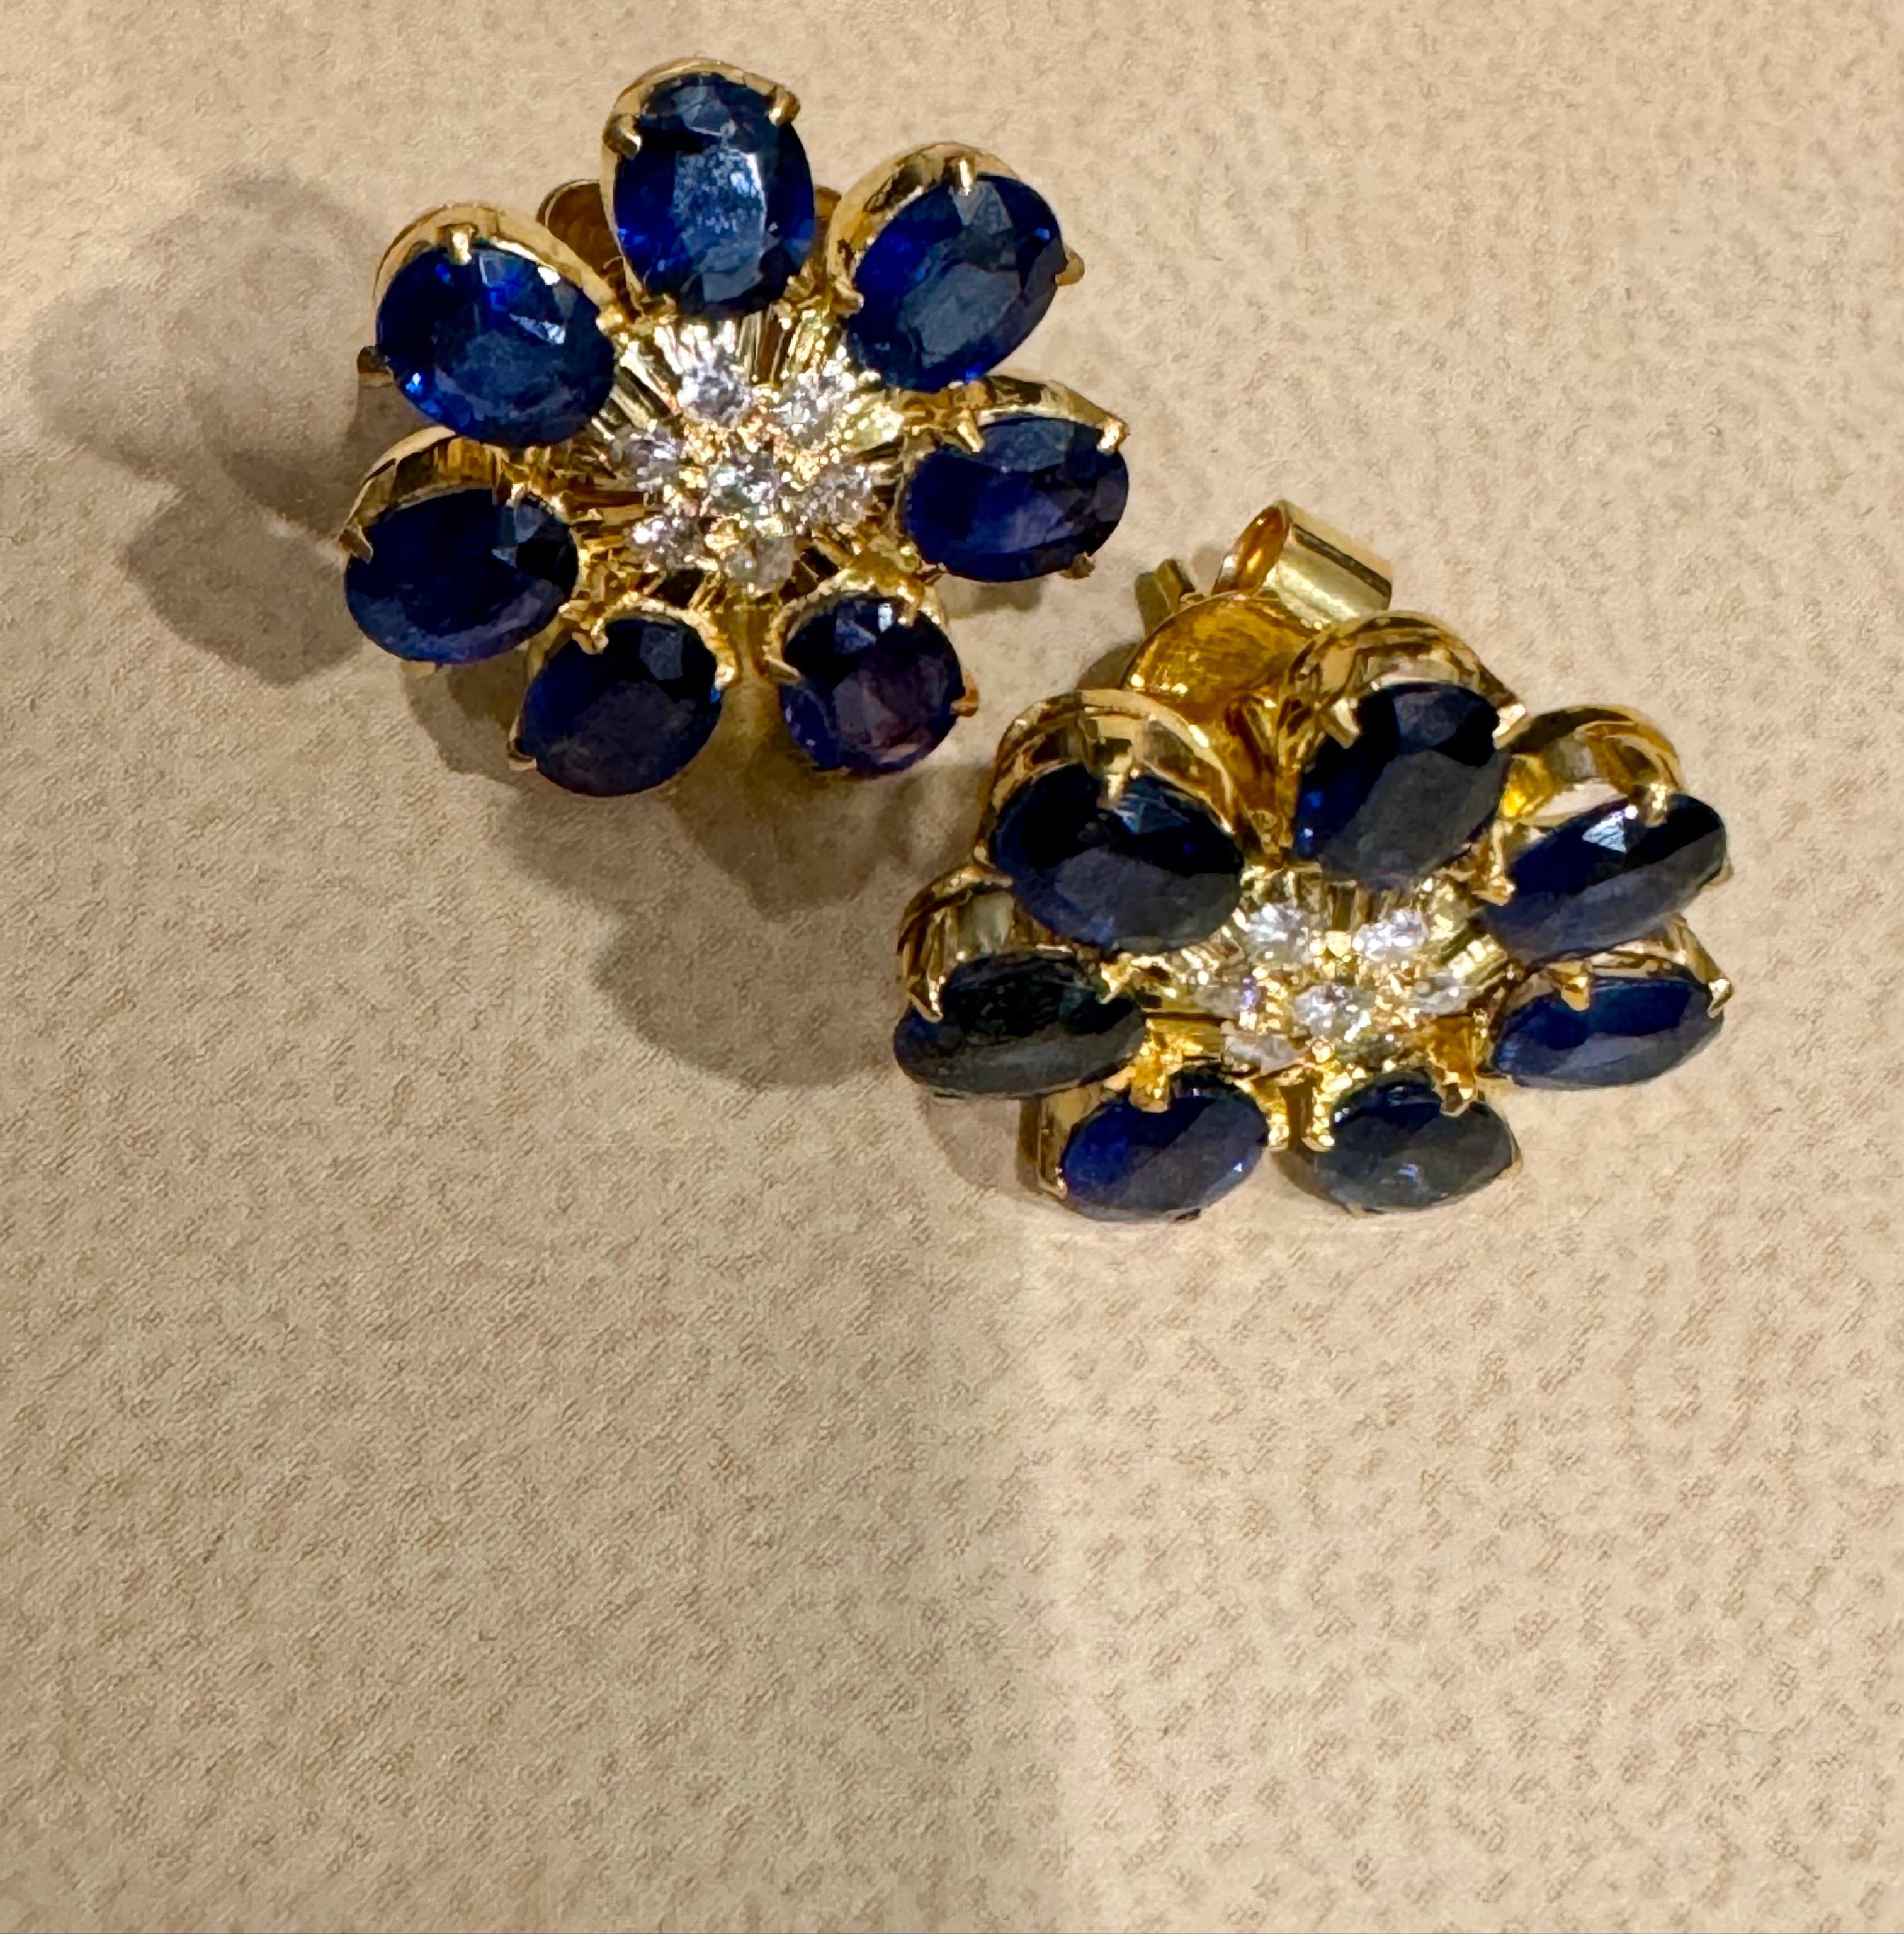 7 Petals Natural Sapphire and Diamonds Flower Post Earrings 18 Karat Yellow Gold In Excellent Condition For Sale In New York, NY